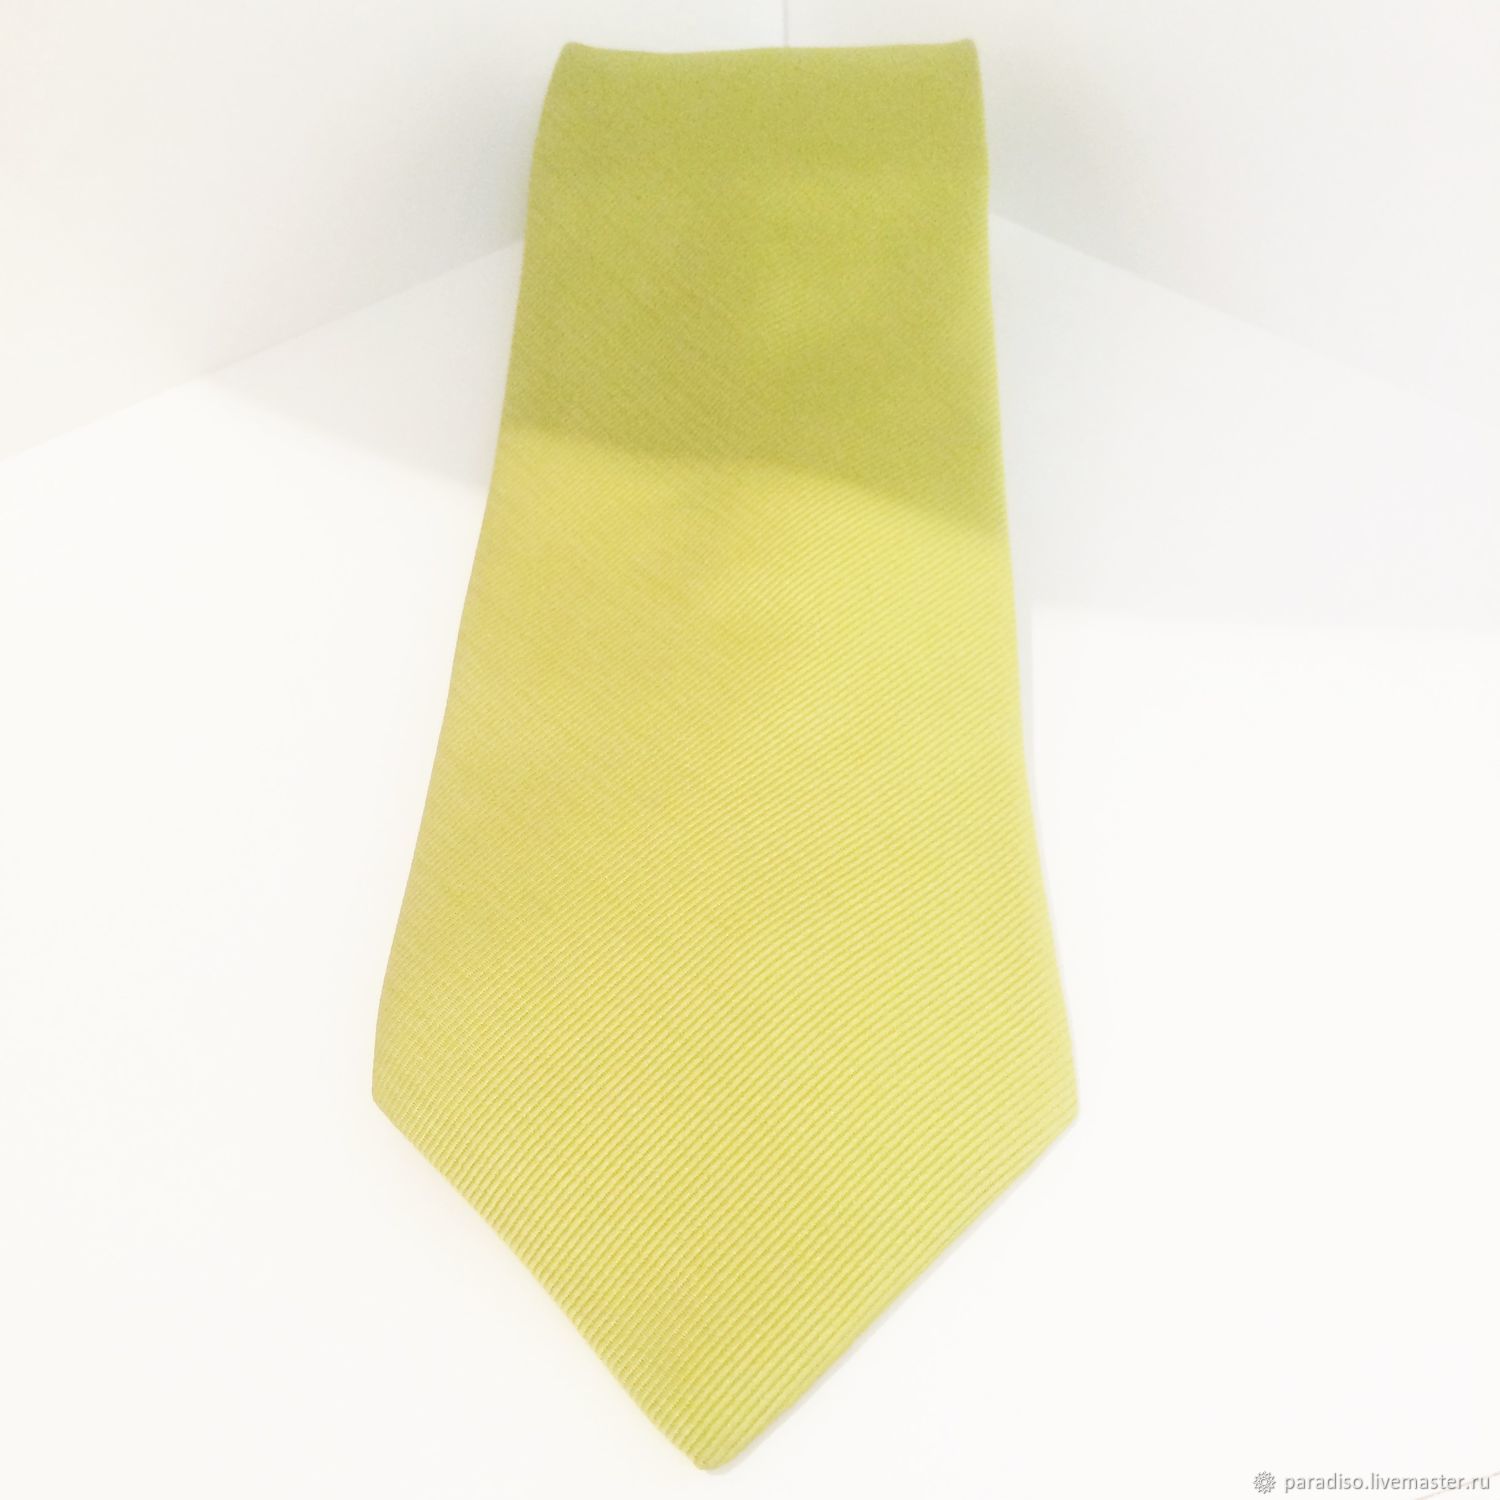 JAZZ men's tie in the style of jazz, Ties, Moscow,  Фото №1